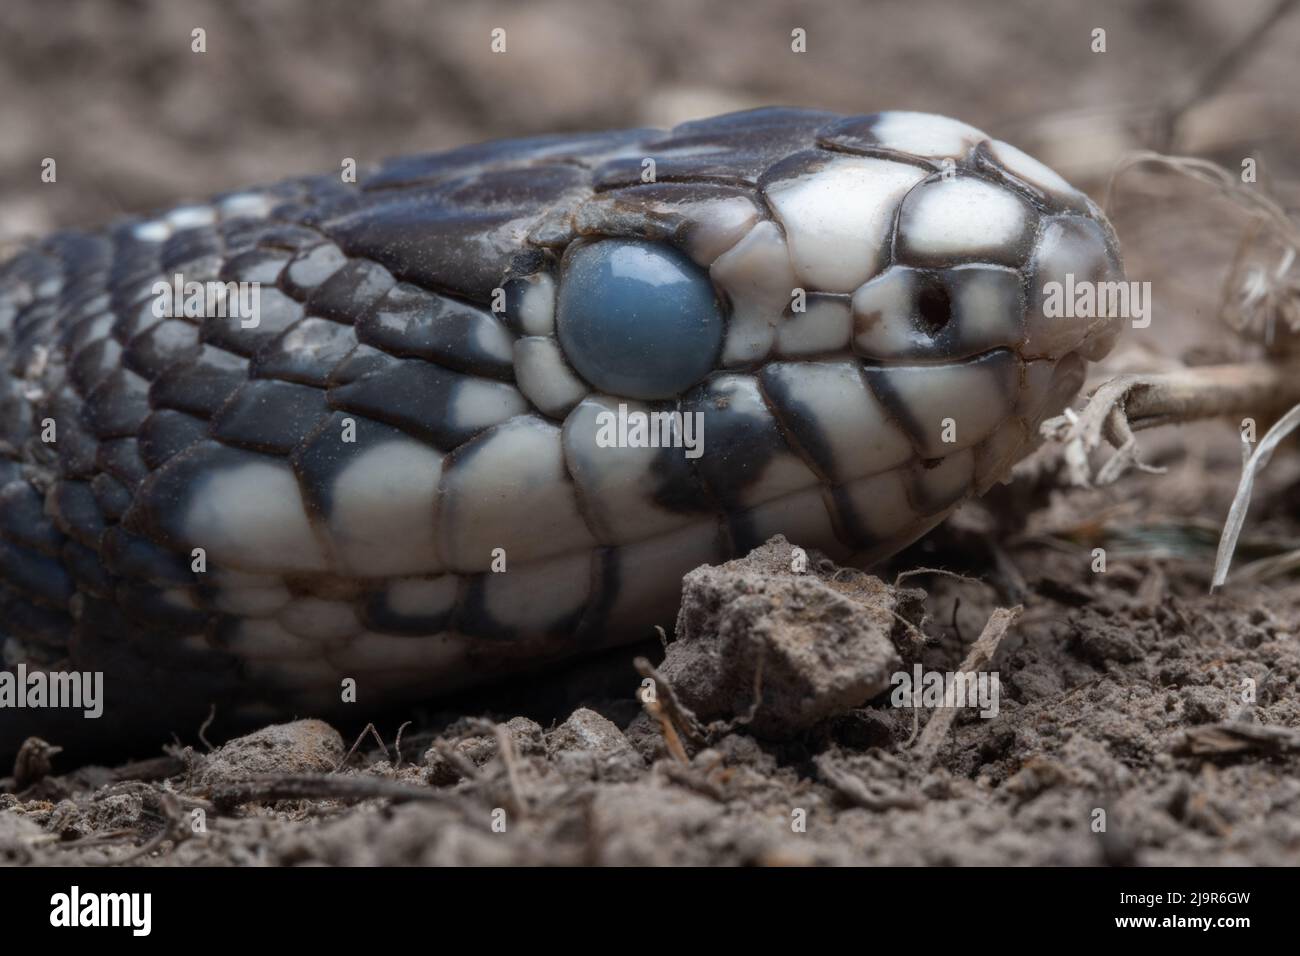 The clouded eye of a California Kingsnake (Lampropeltis californiae) indicates this snake is about to shed its skin. Stock Photo